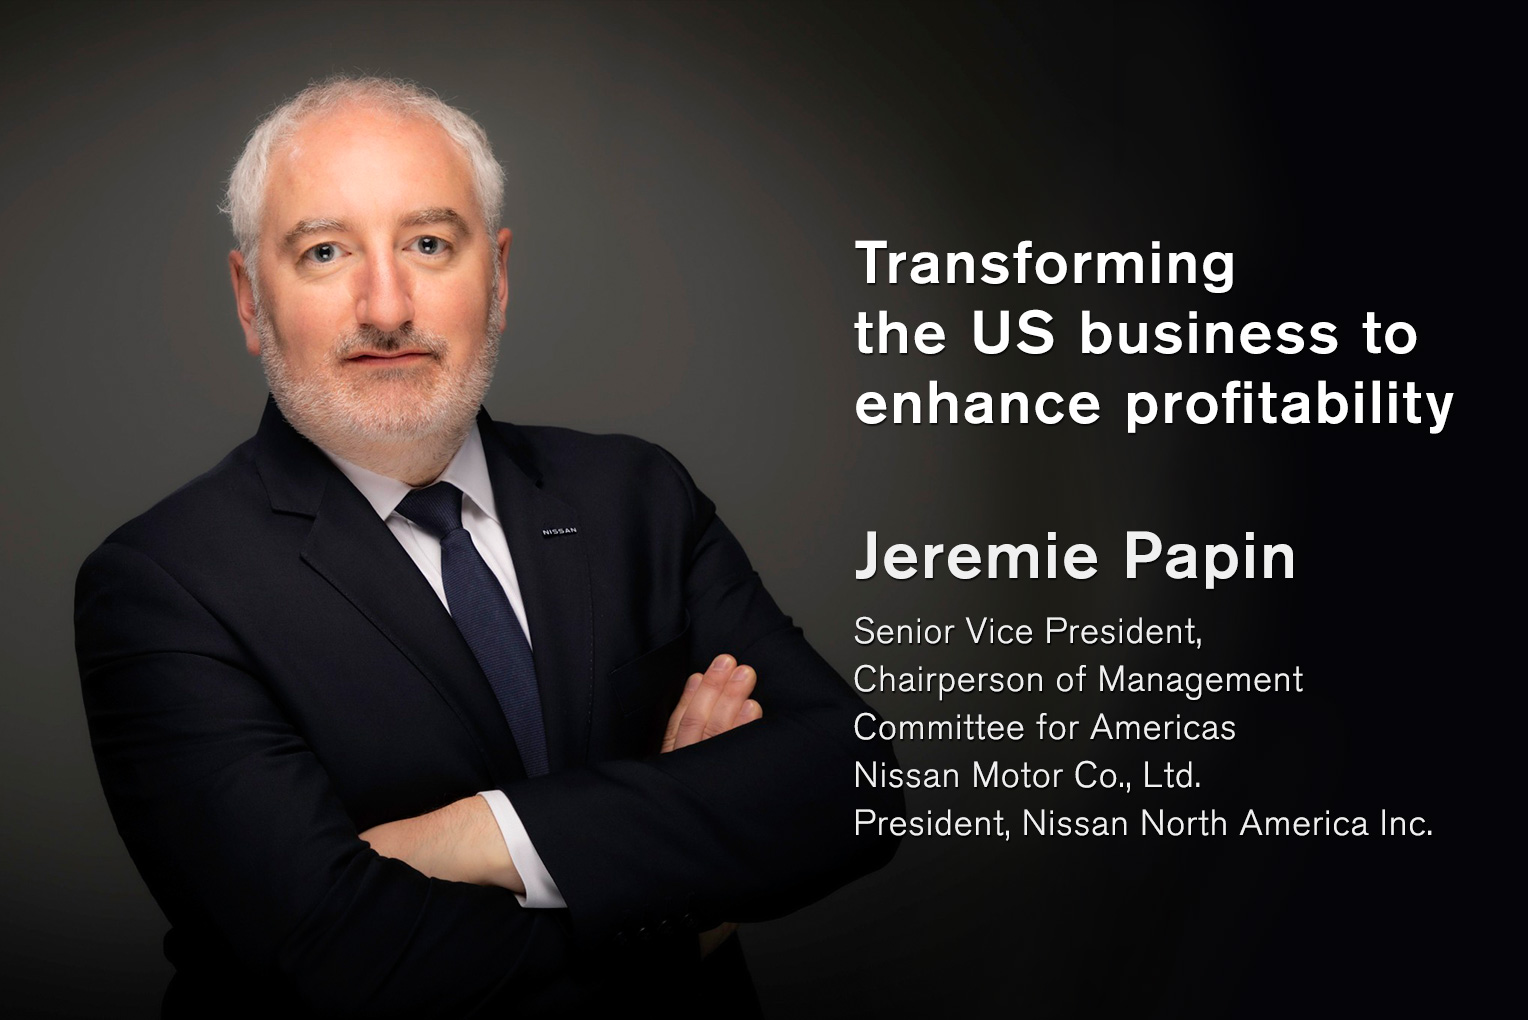 Interview with Jeremie Papin SVP, Chairperson of Management Committee for Americas